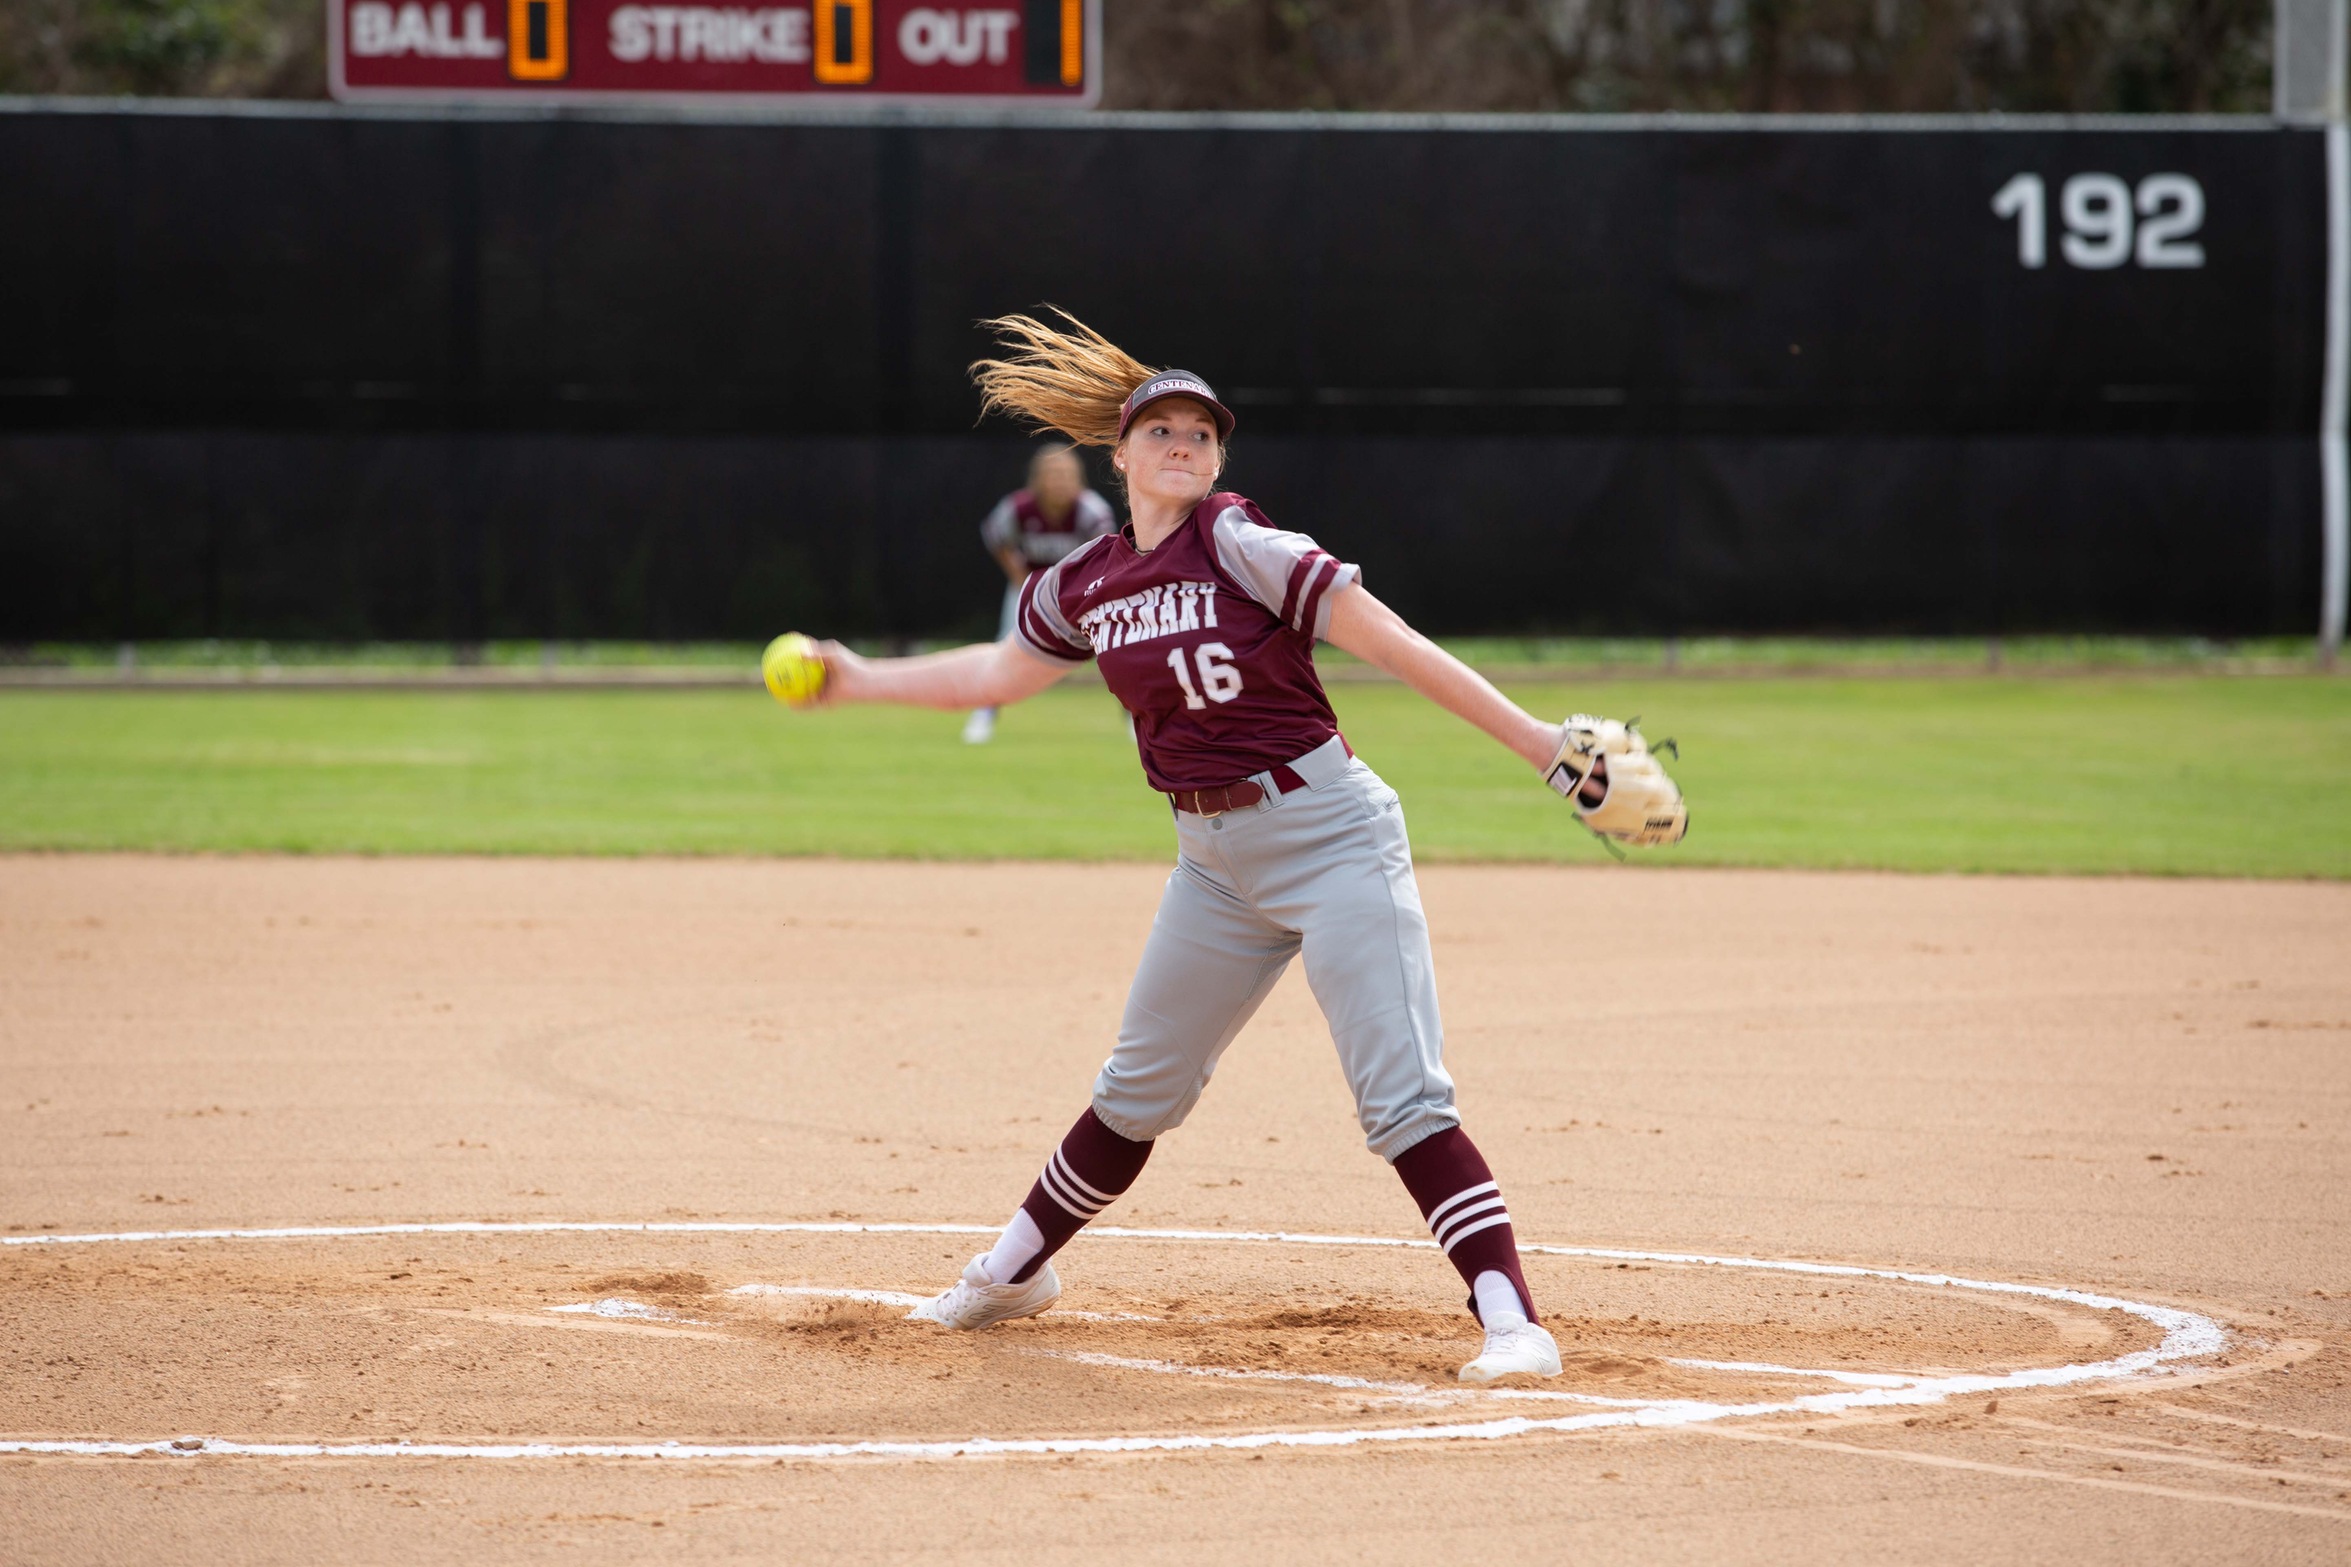 Softball Registers Convincing DH Sweep of Dallas on Saturday